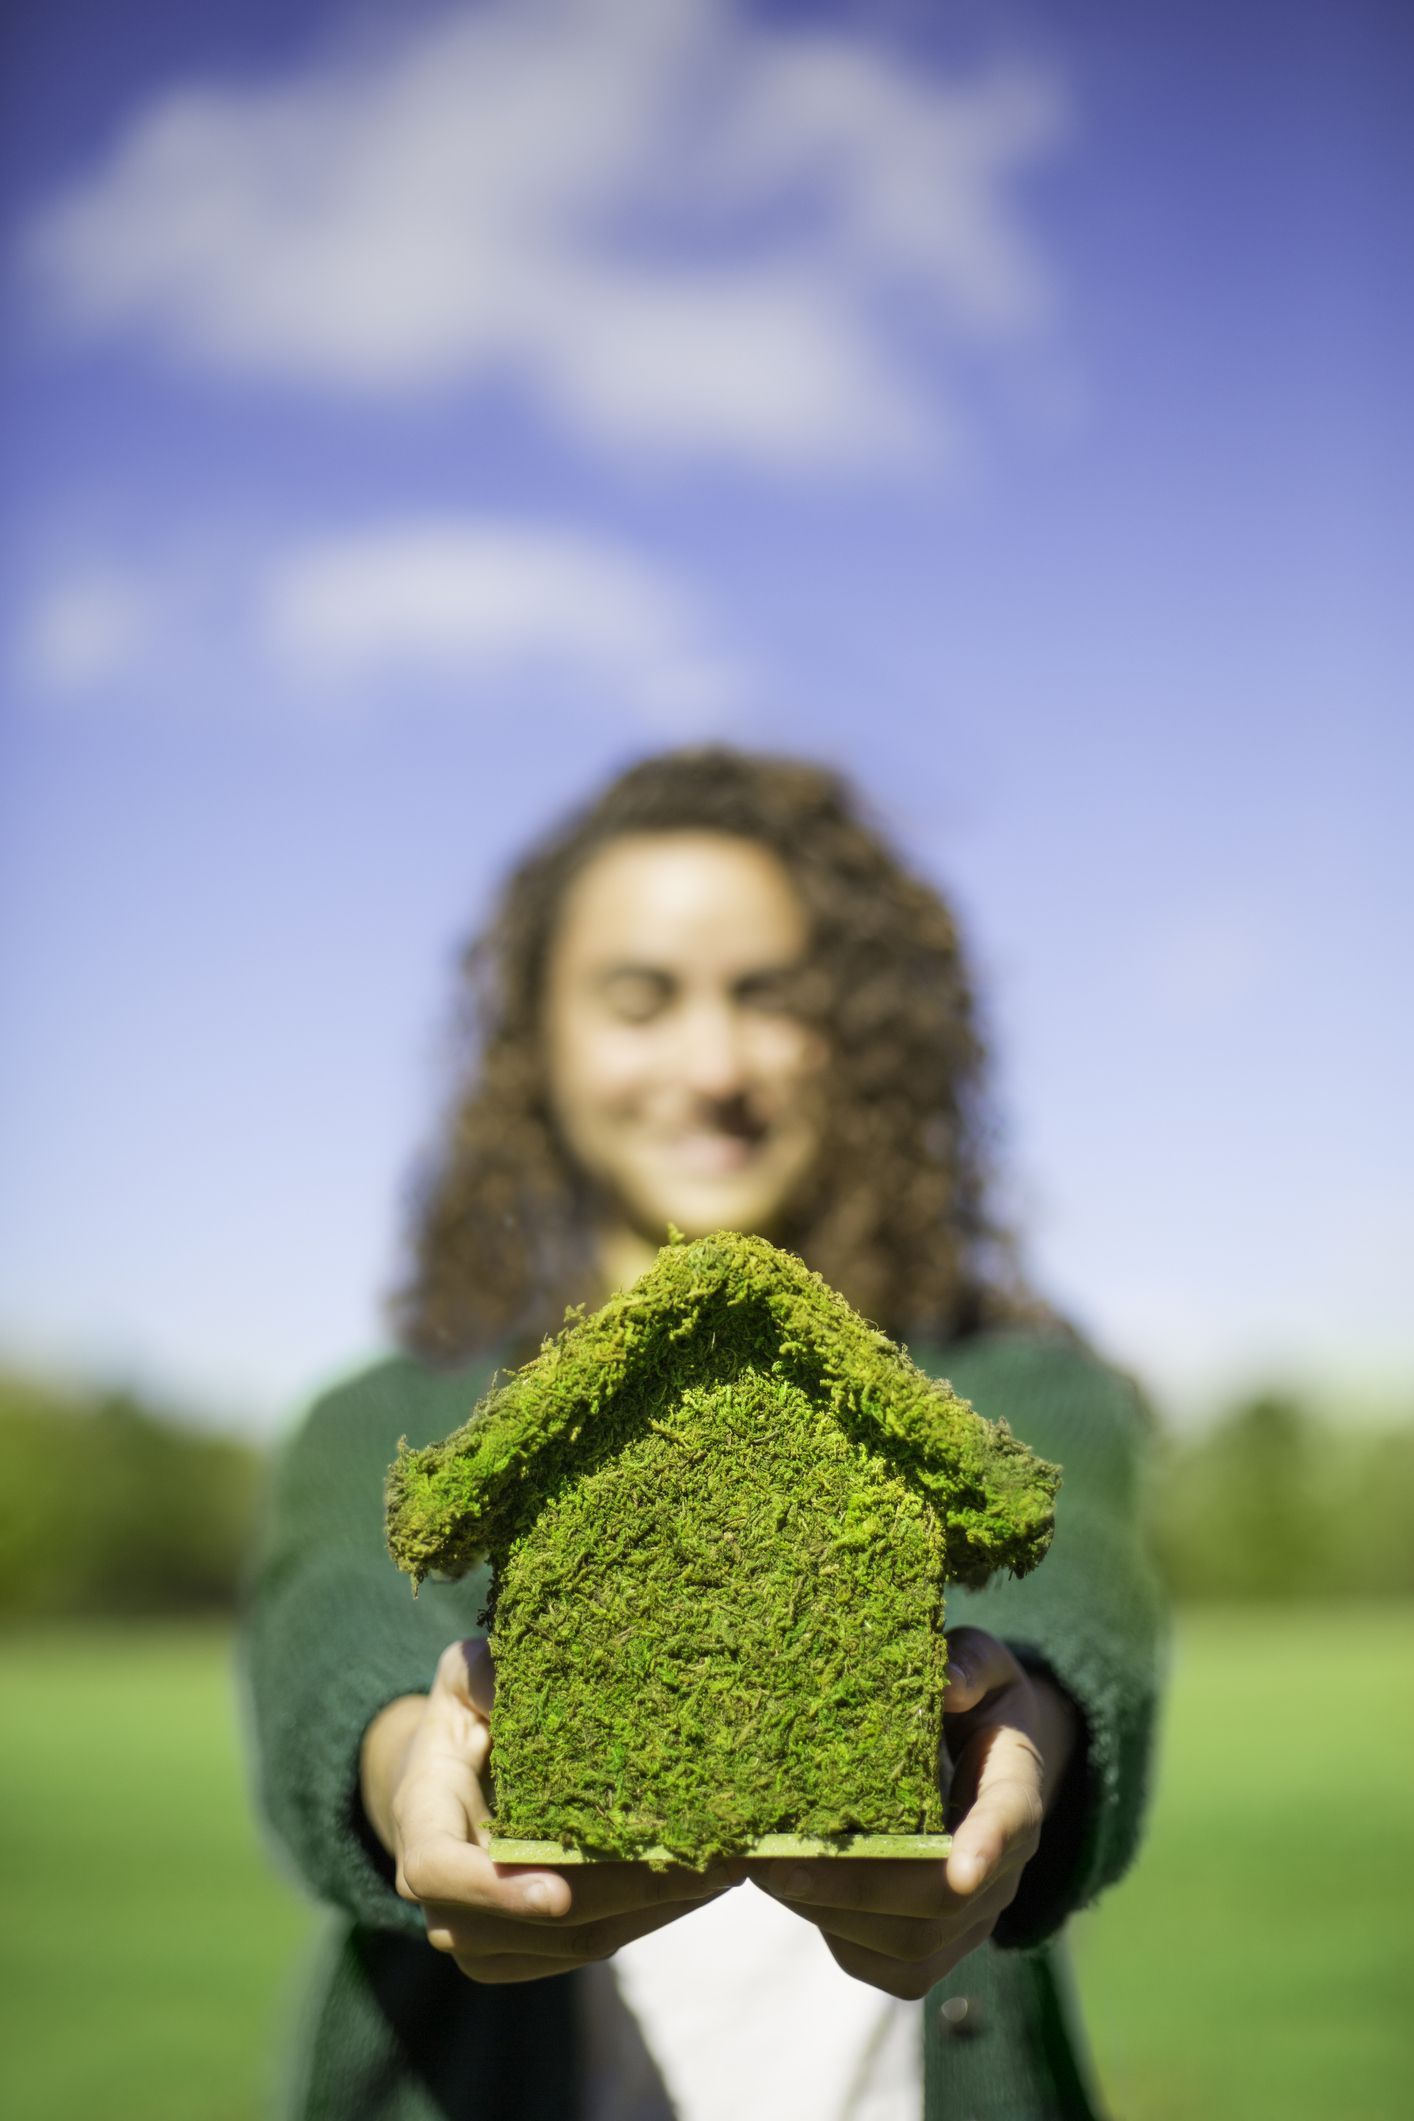 5 Easy Ways to Make your Home More Eco-Friendly